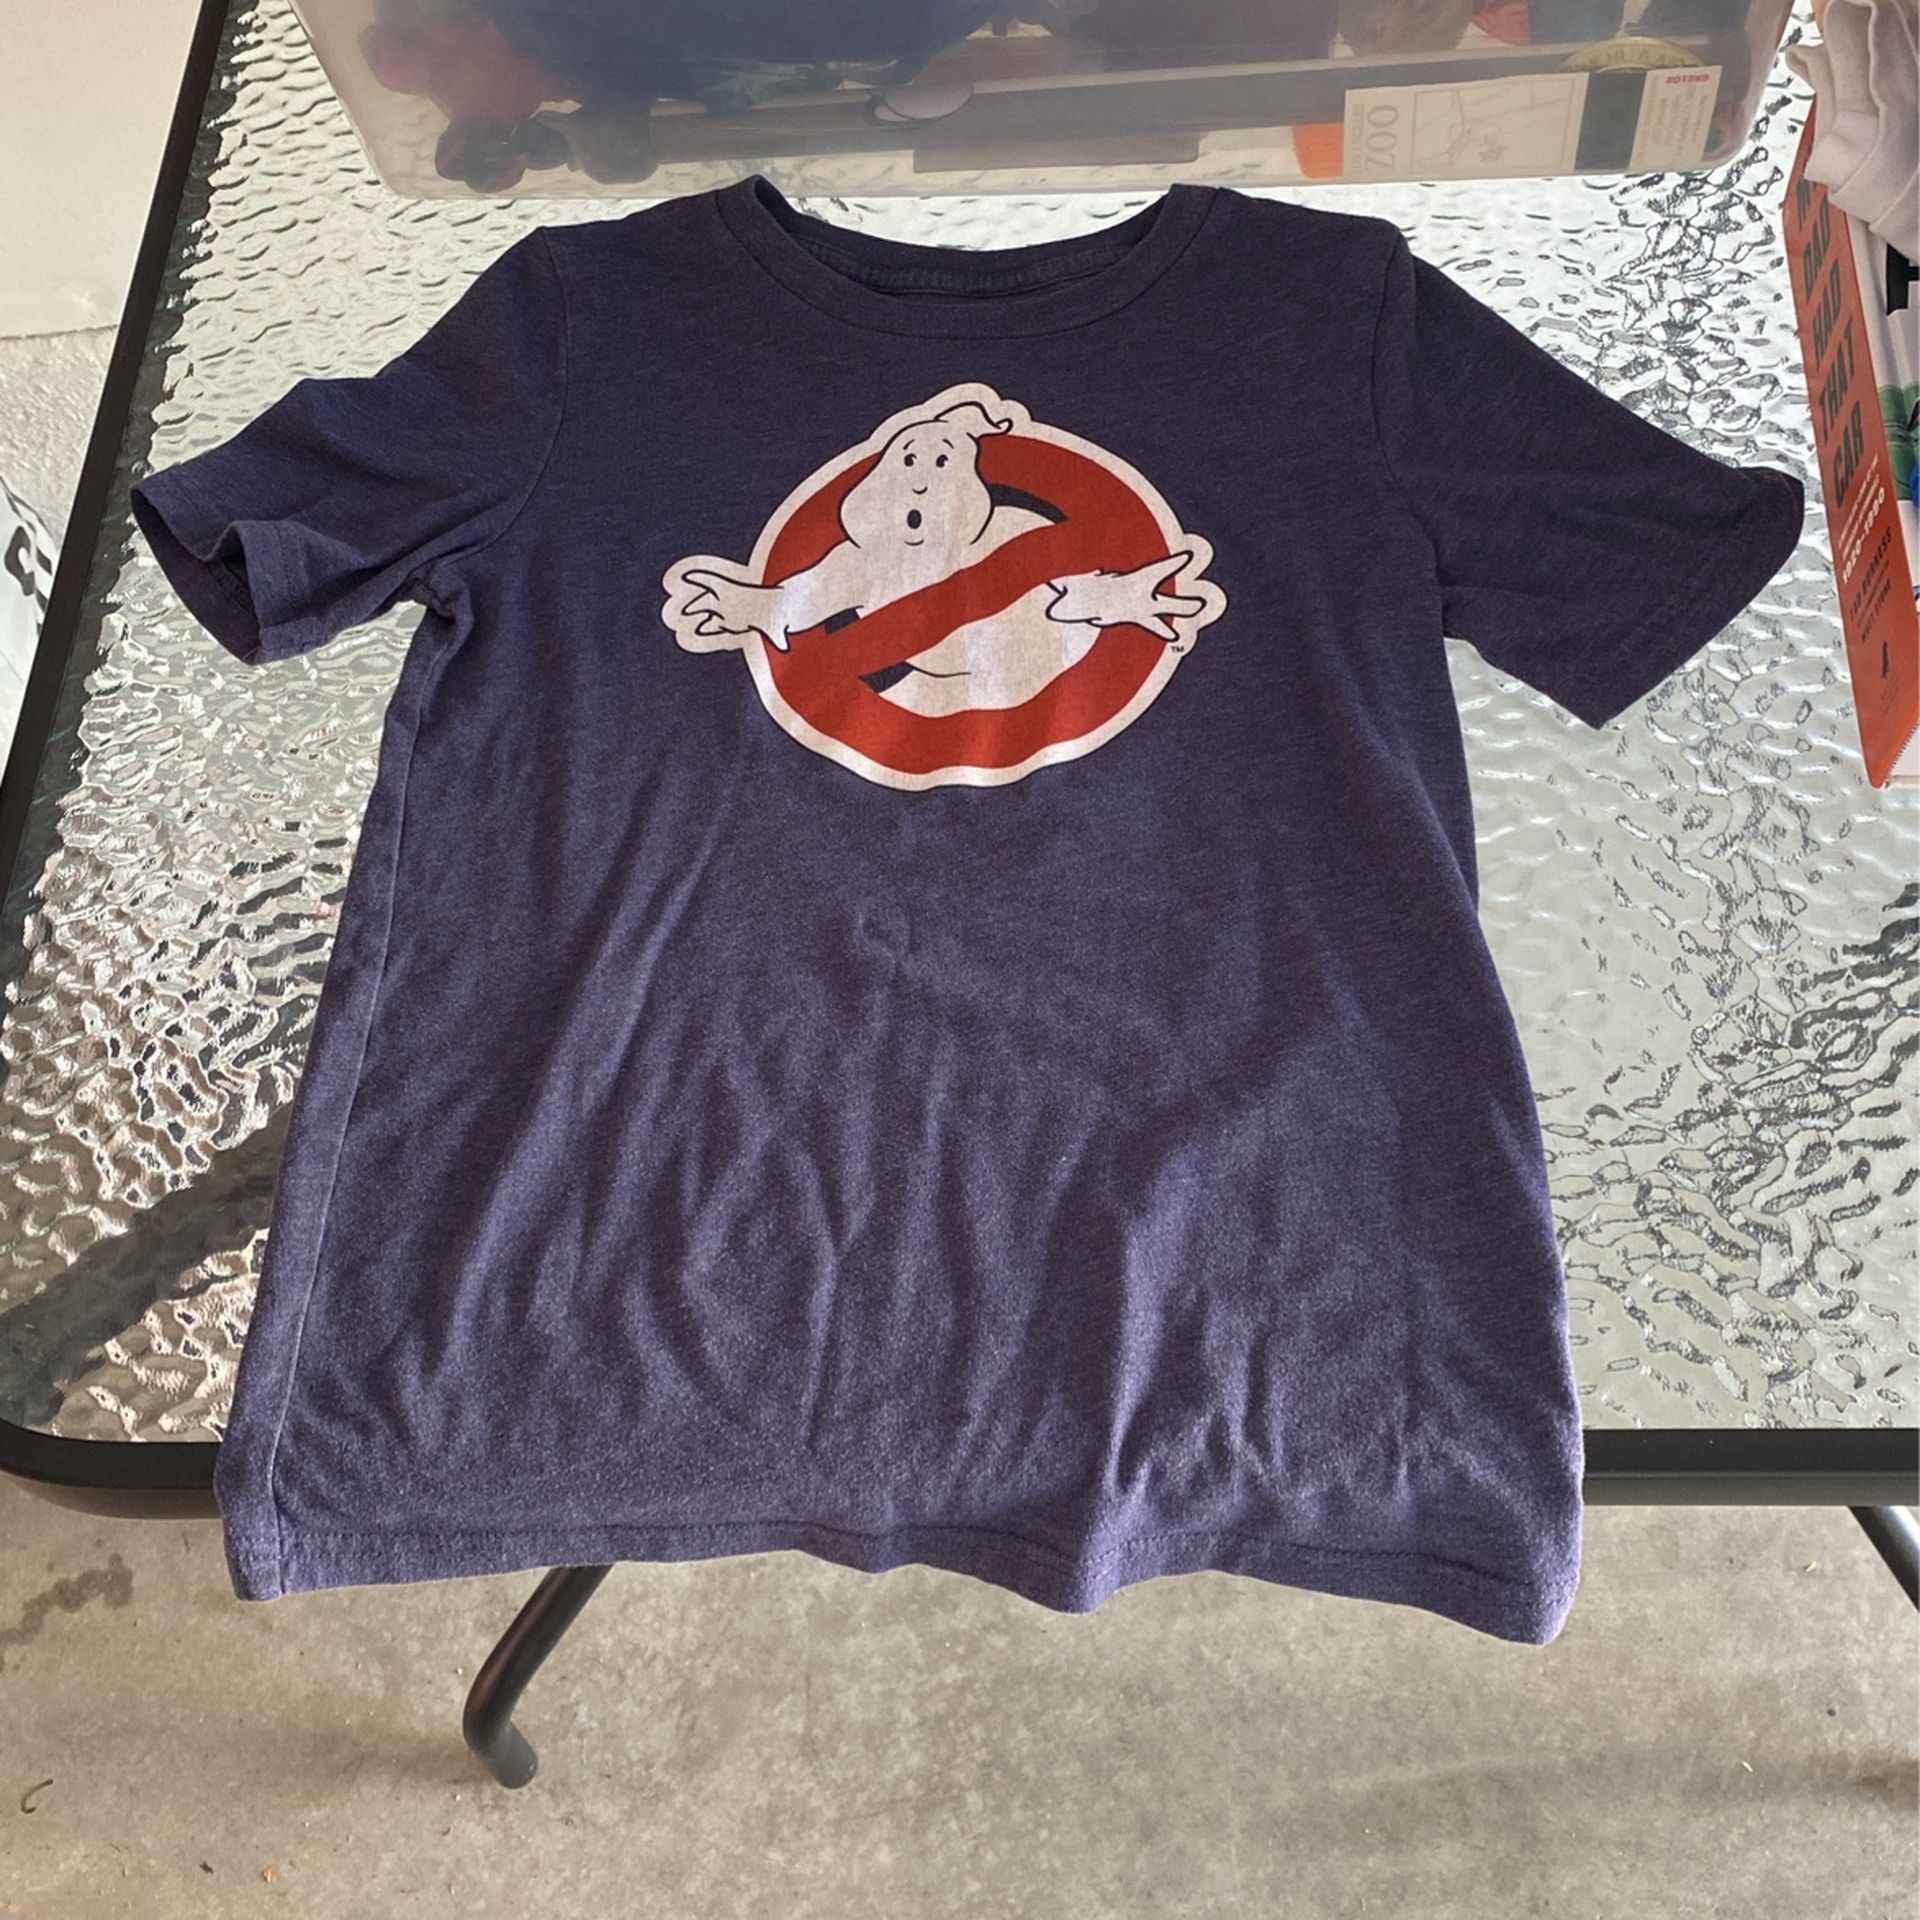 Boys Ghost Busters T-shirt (Size 8)